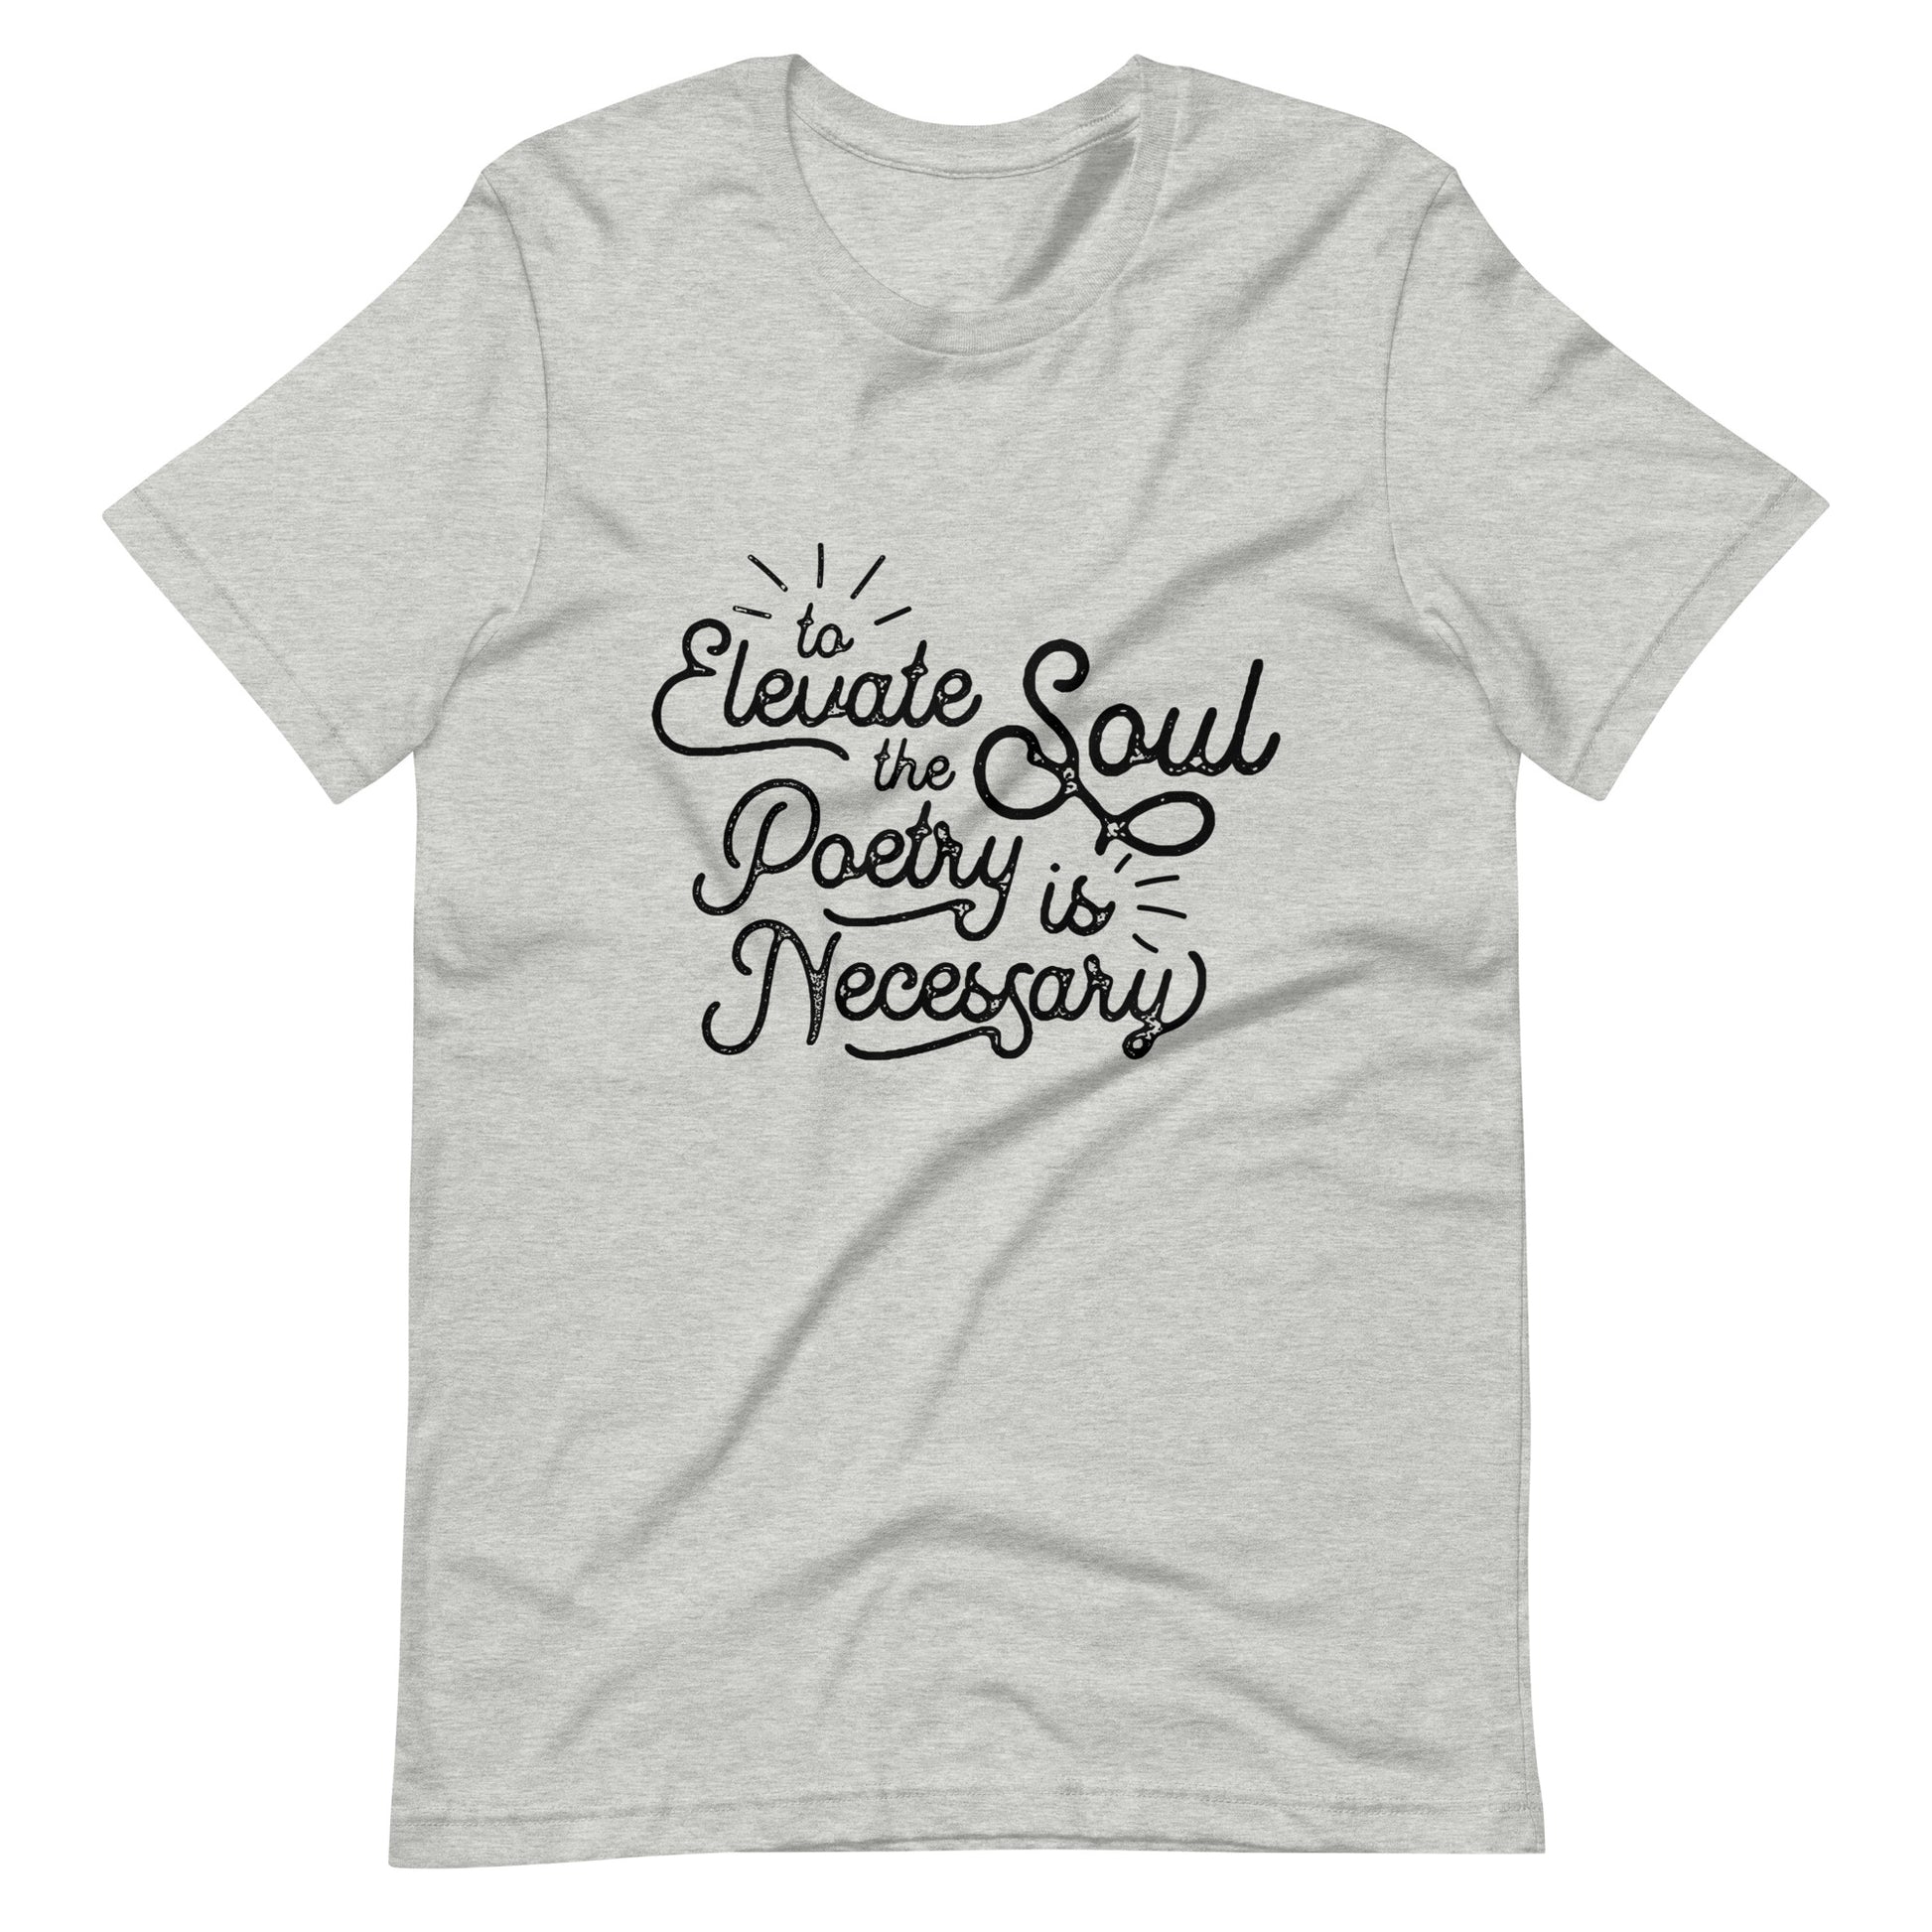 To Elevate the Soul Edgar Allan Poe Quote - Men's t-shirt - Athletic Heather Front